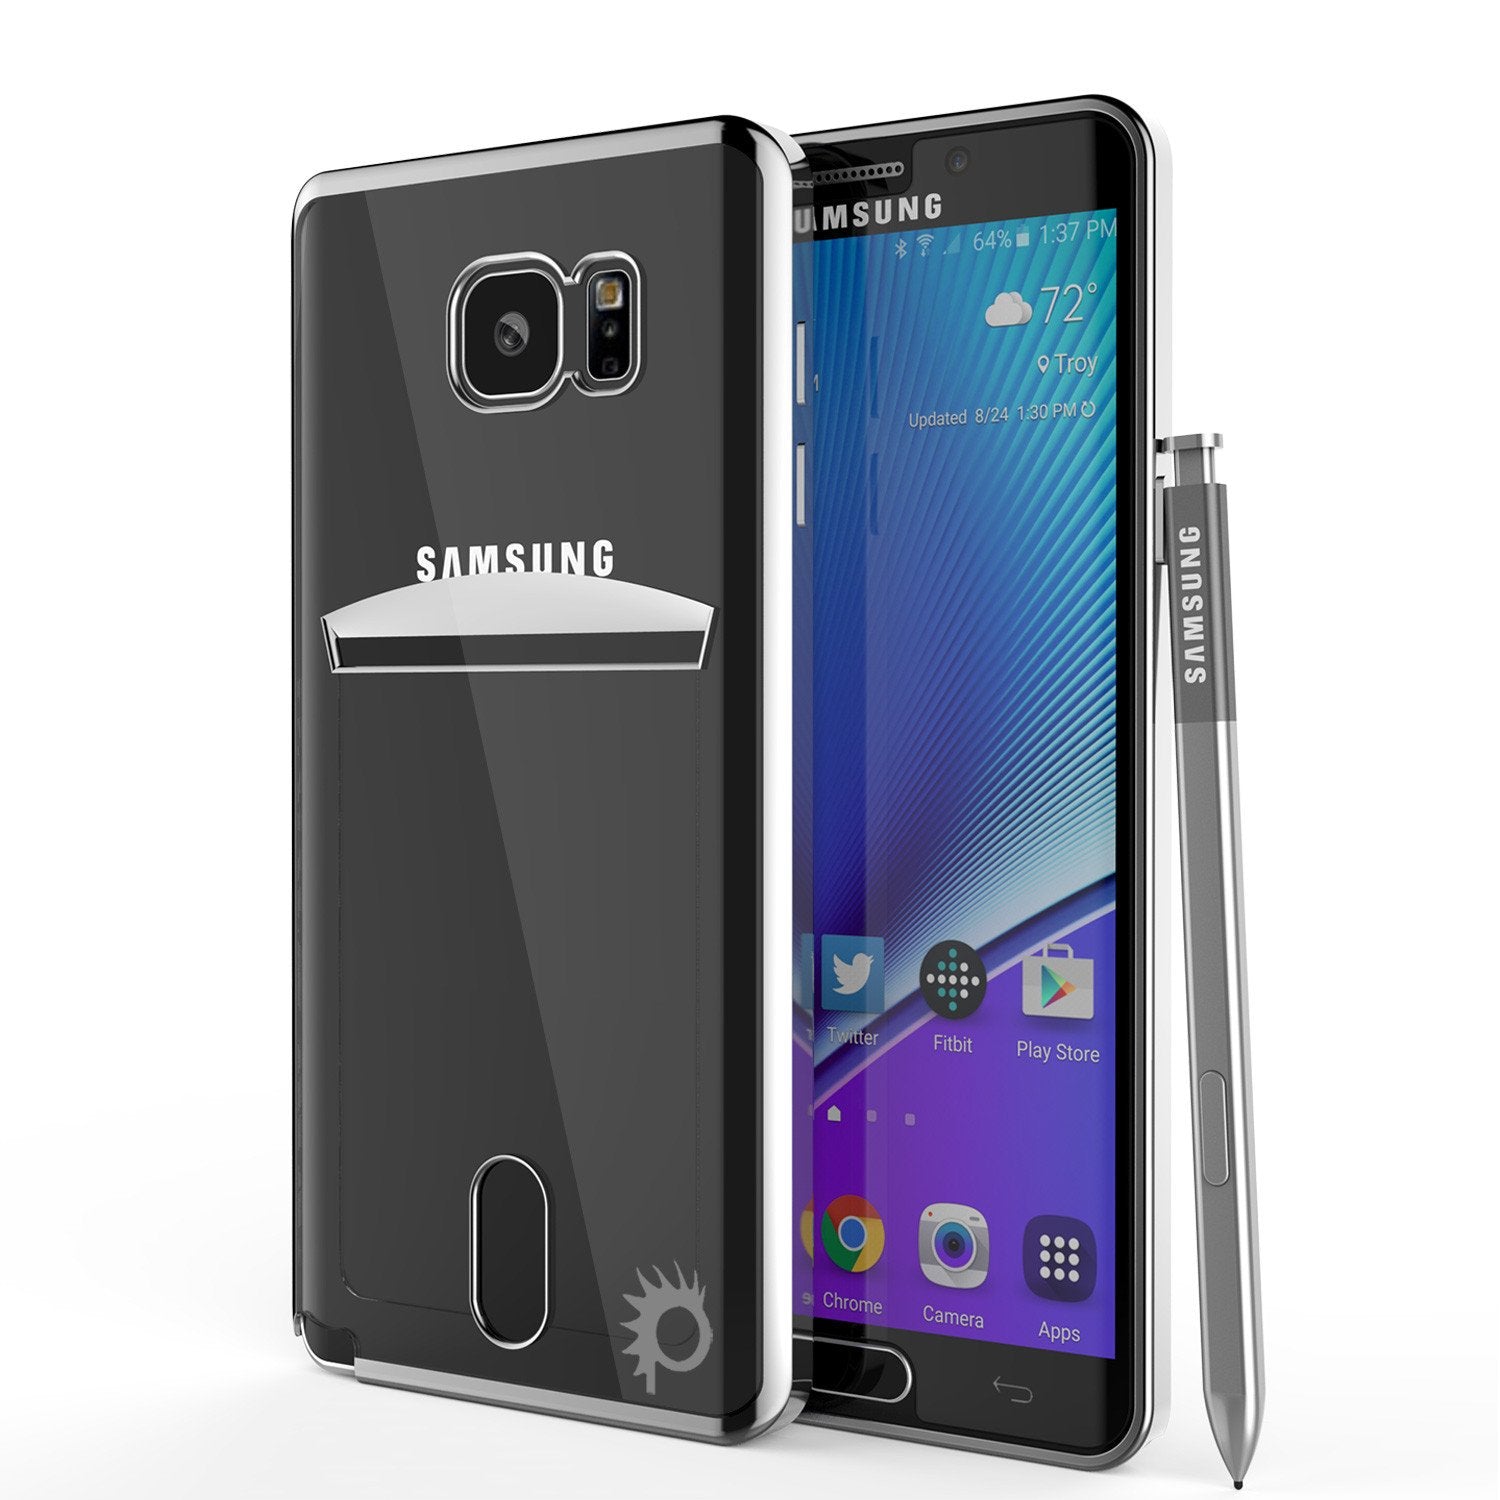 Galaxy Note 5 Case, Punkcase® Lucid Silver Series Screen Protector